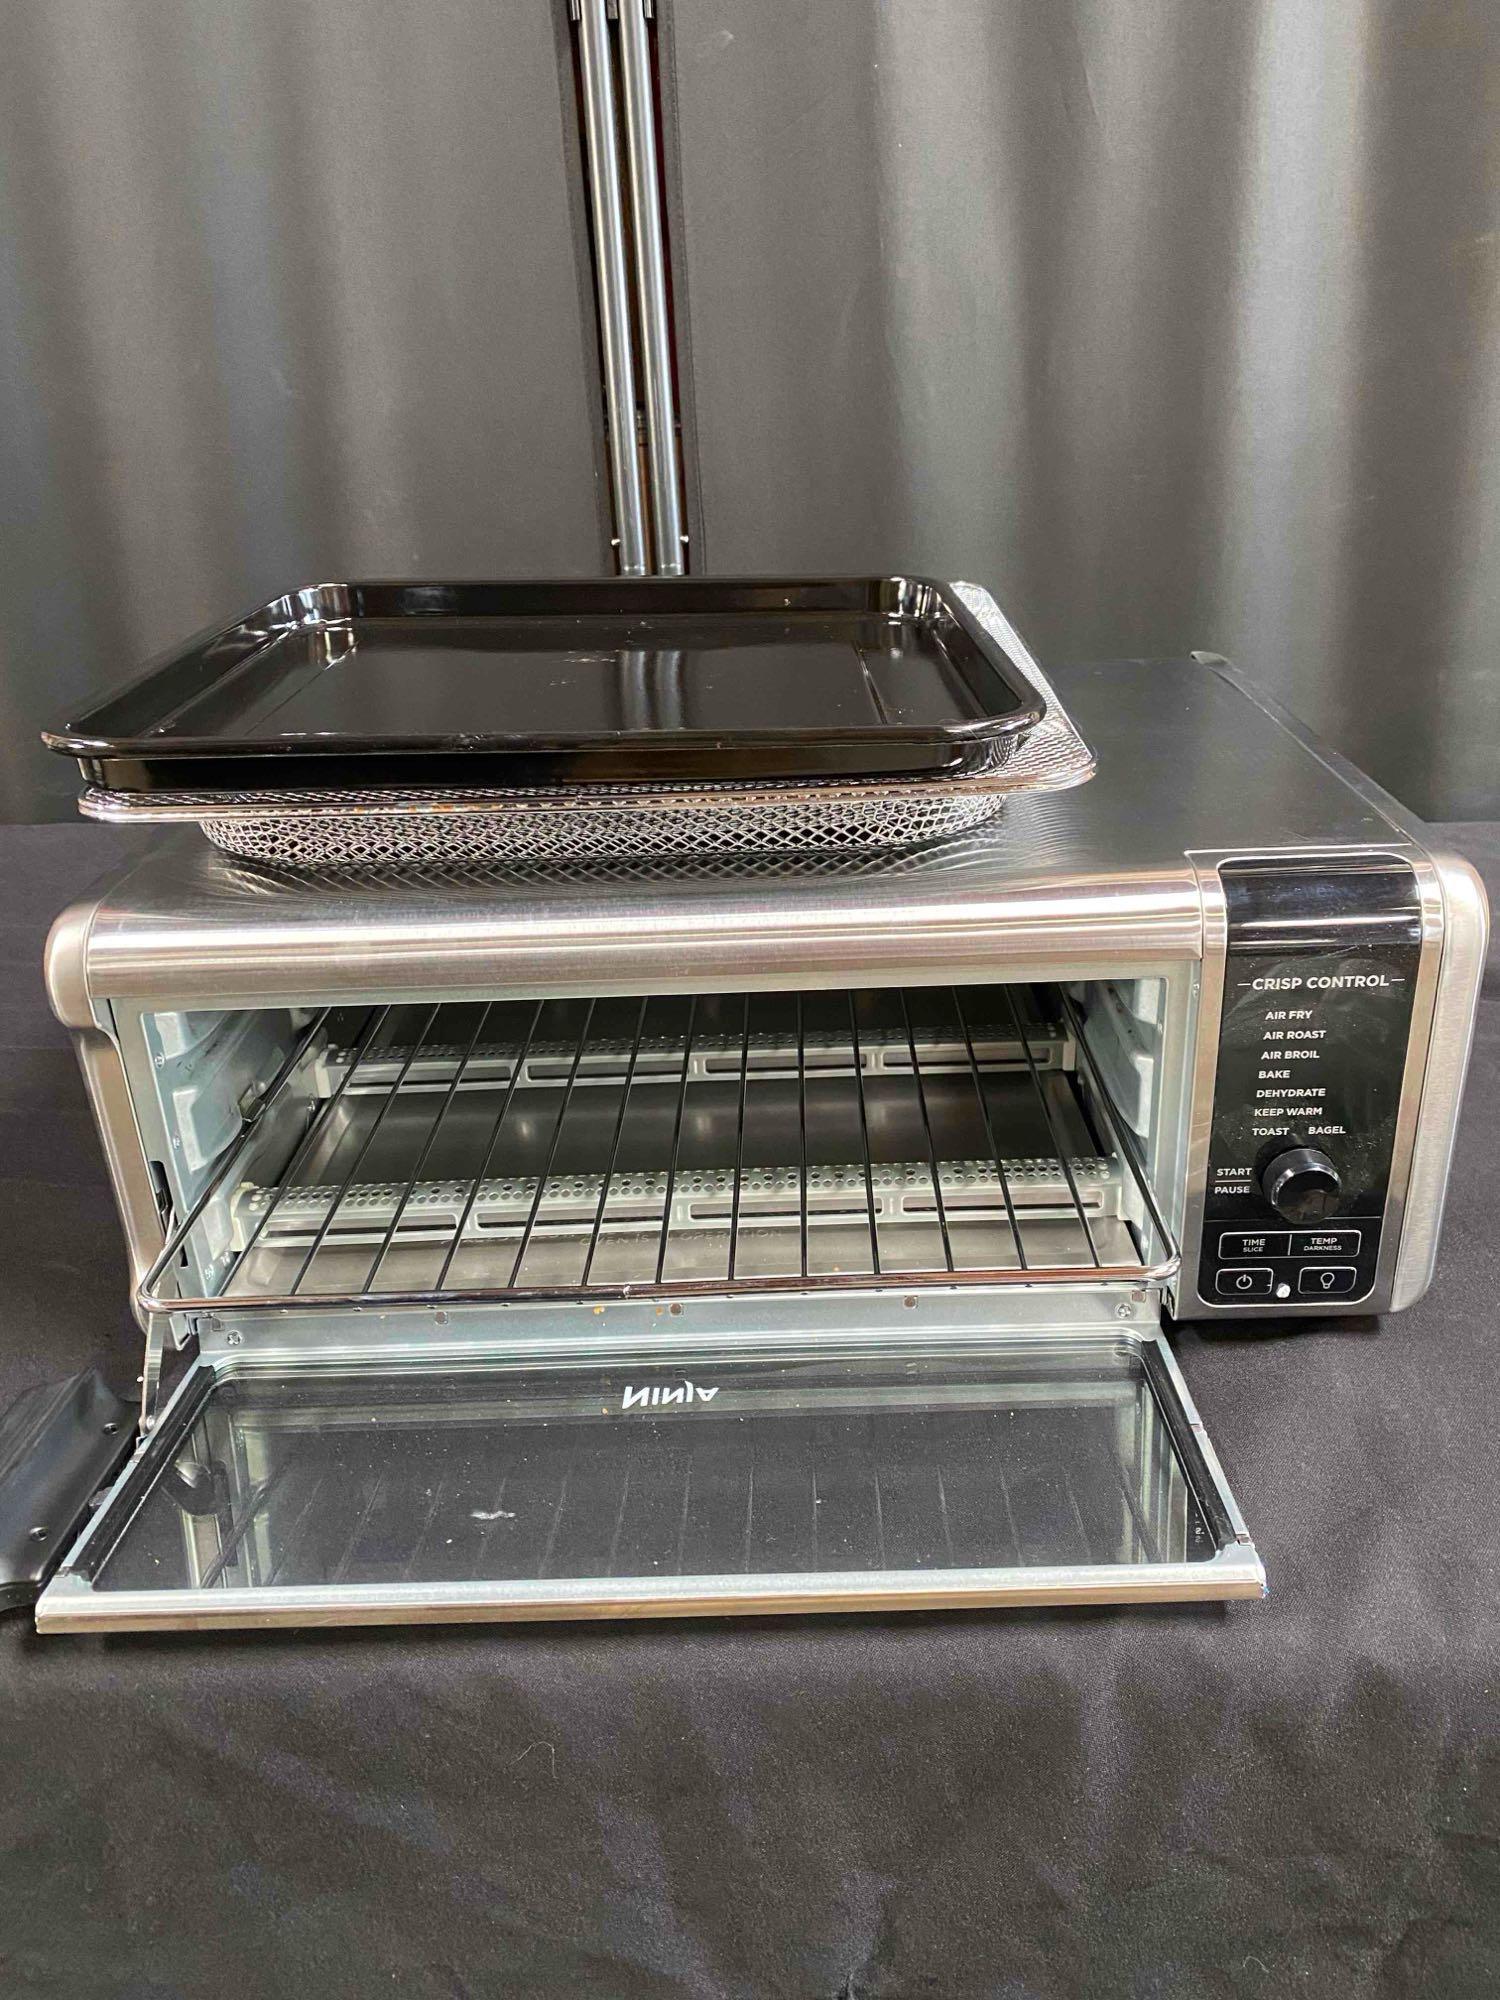 Ninja SP101 Digital Air Fry Countertop Oven with 8-in-1 Functionality